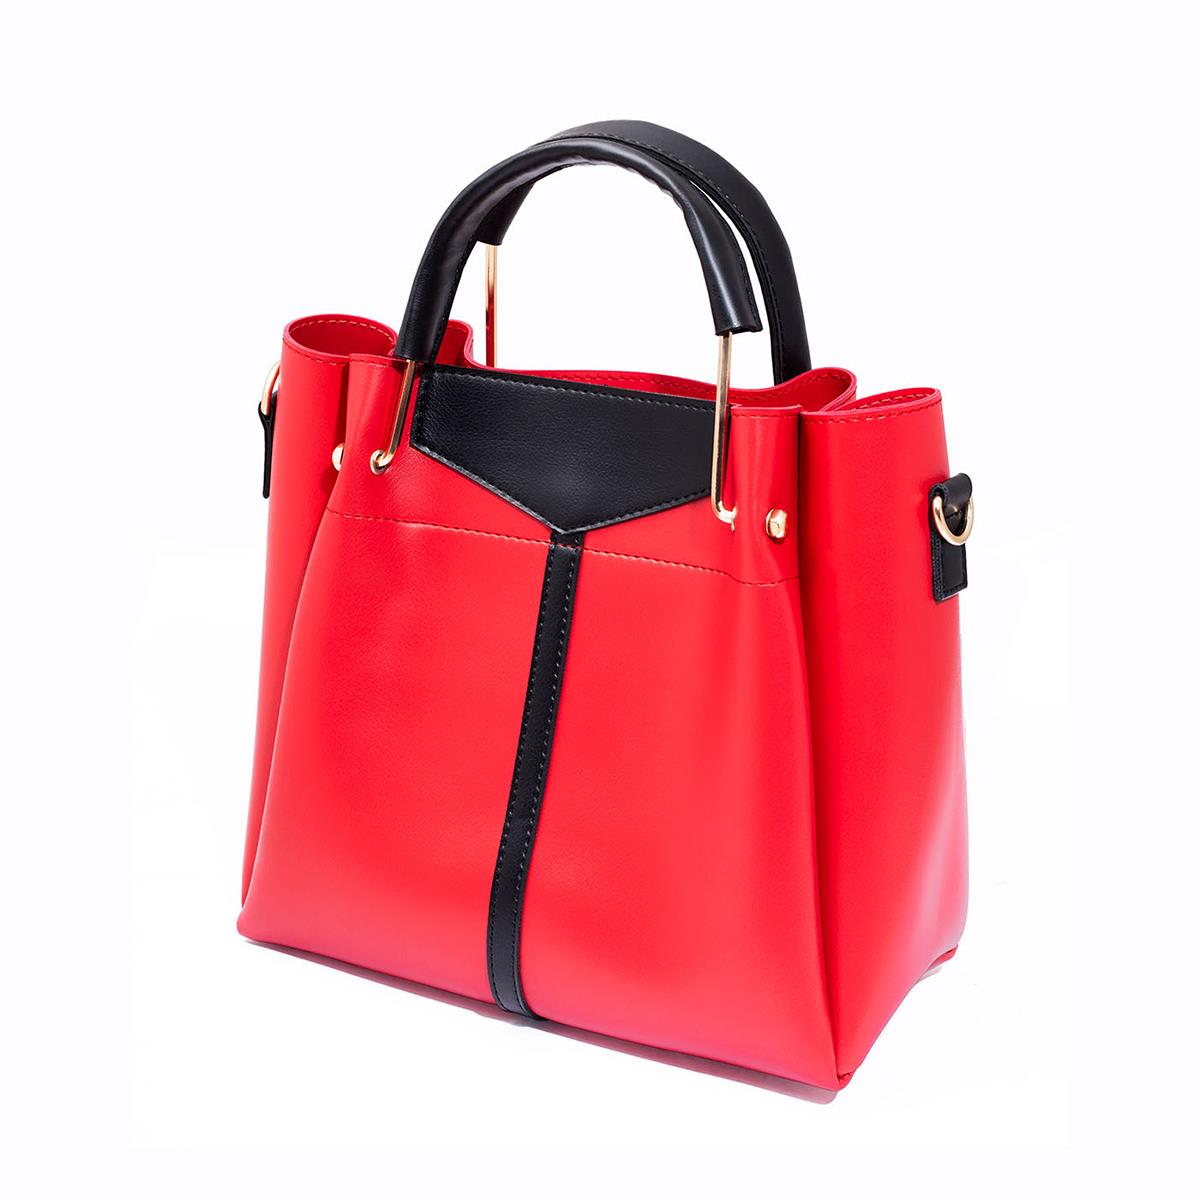 Bags for Girls | Ladies Bags Online Shopping in Pakistan - Hutch.pk